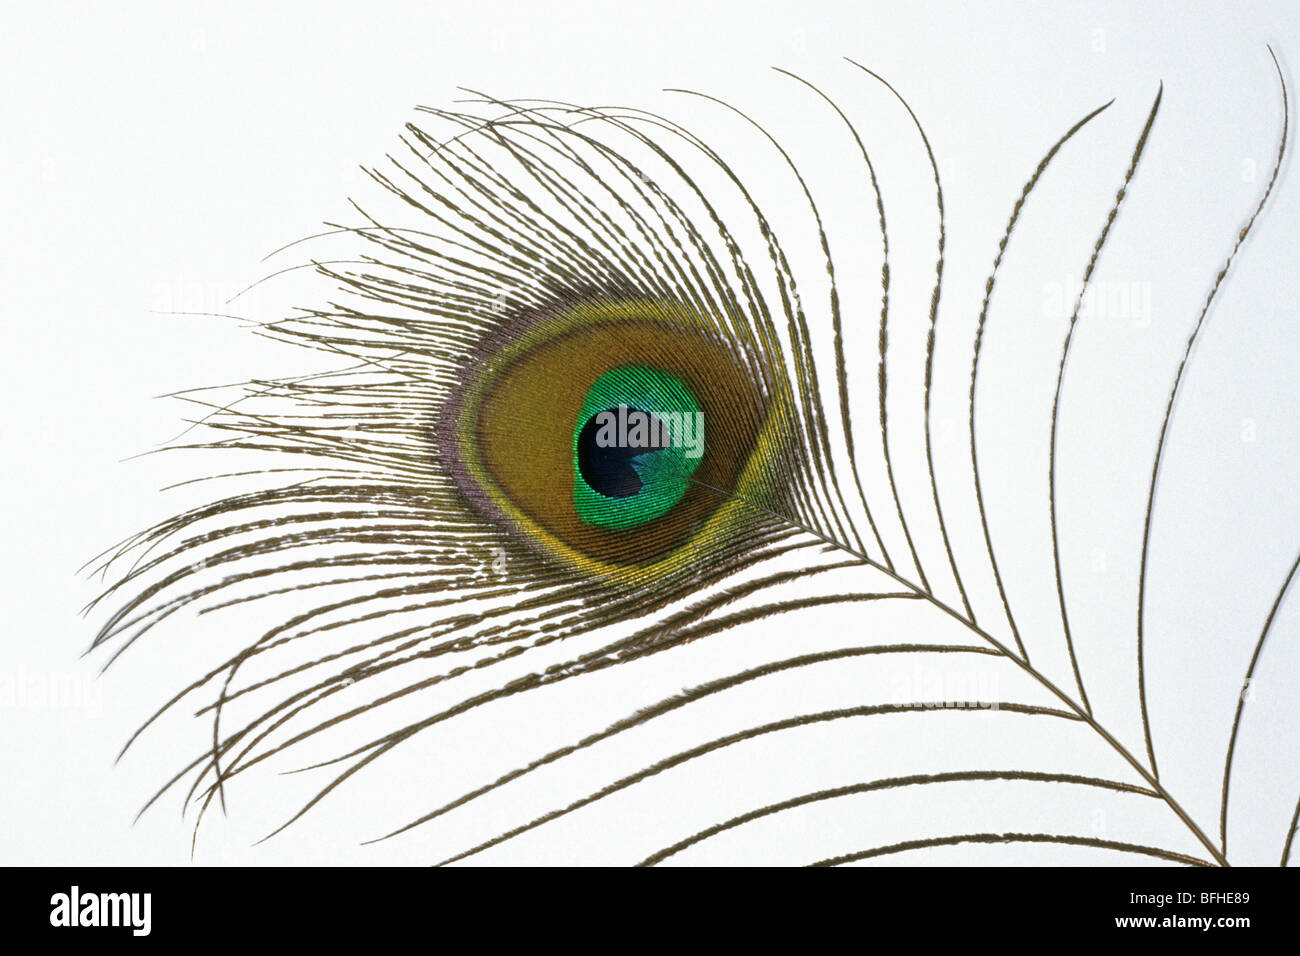 Common Peafowl (Pavo cristatus), close-up of feather showing the iridescent colours. Stock Photo